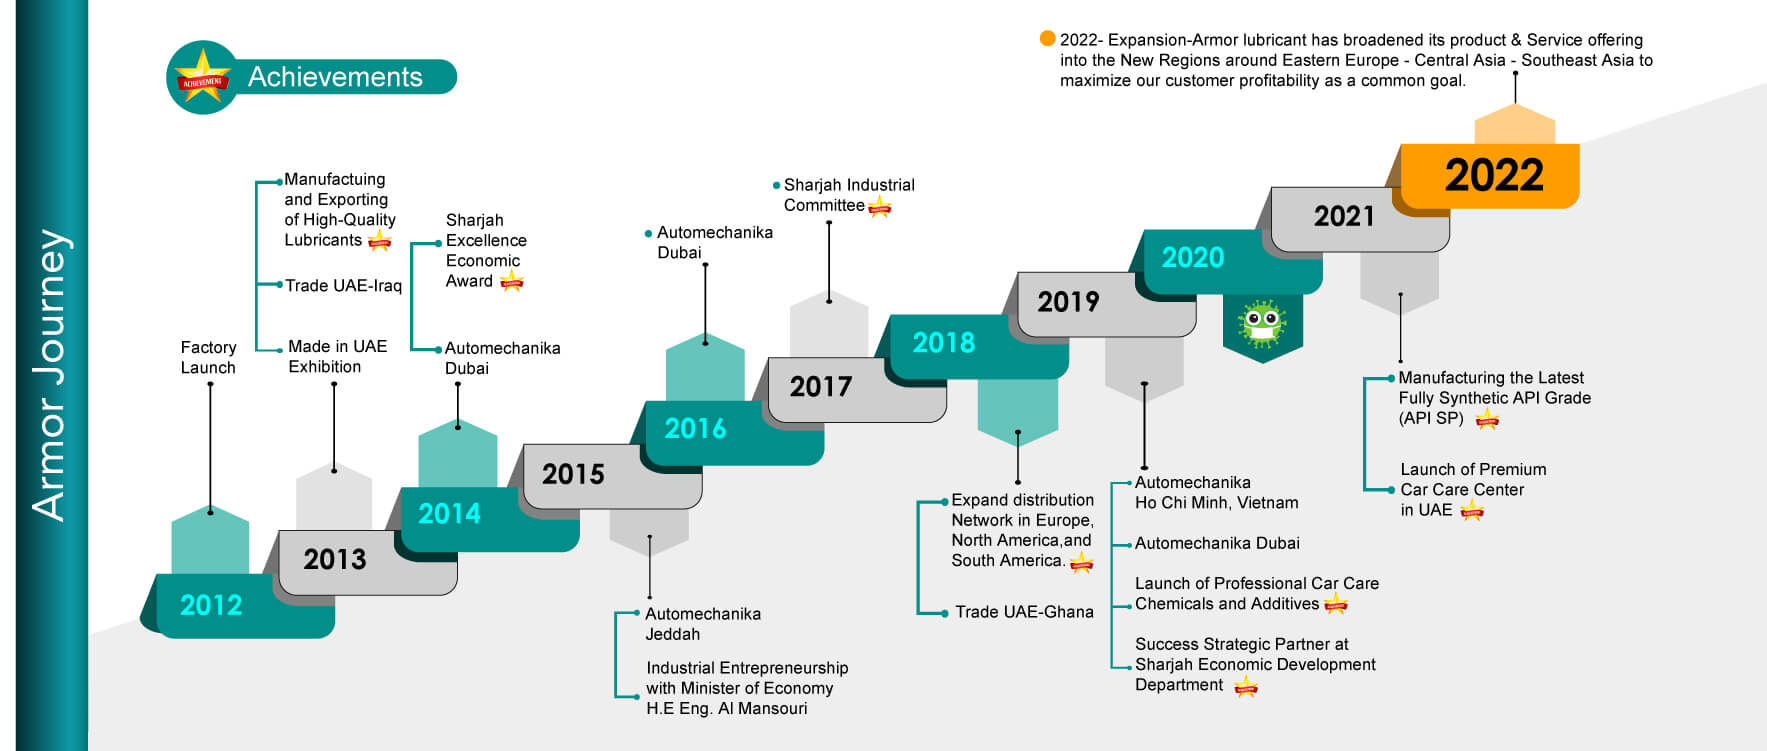 Armor Lubricants Manufacturer Journey from 2012-2021